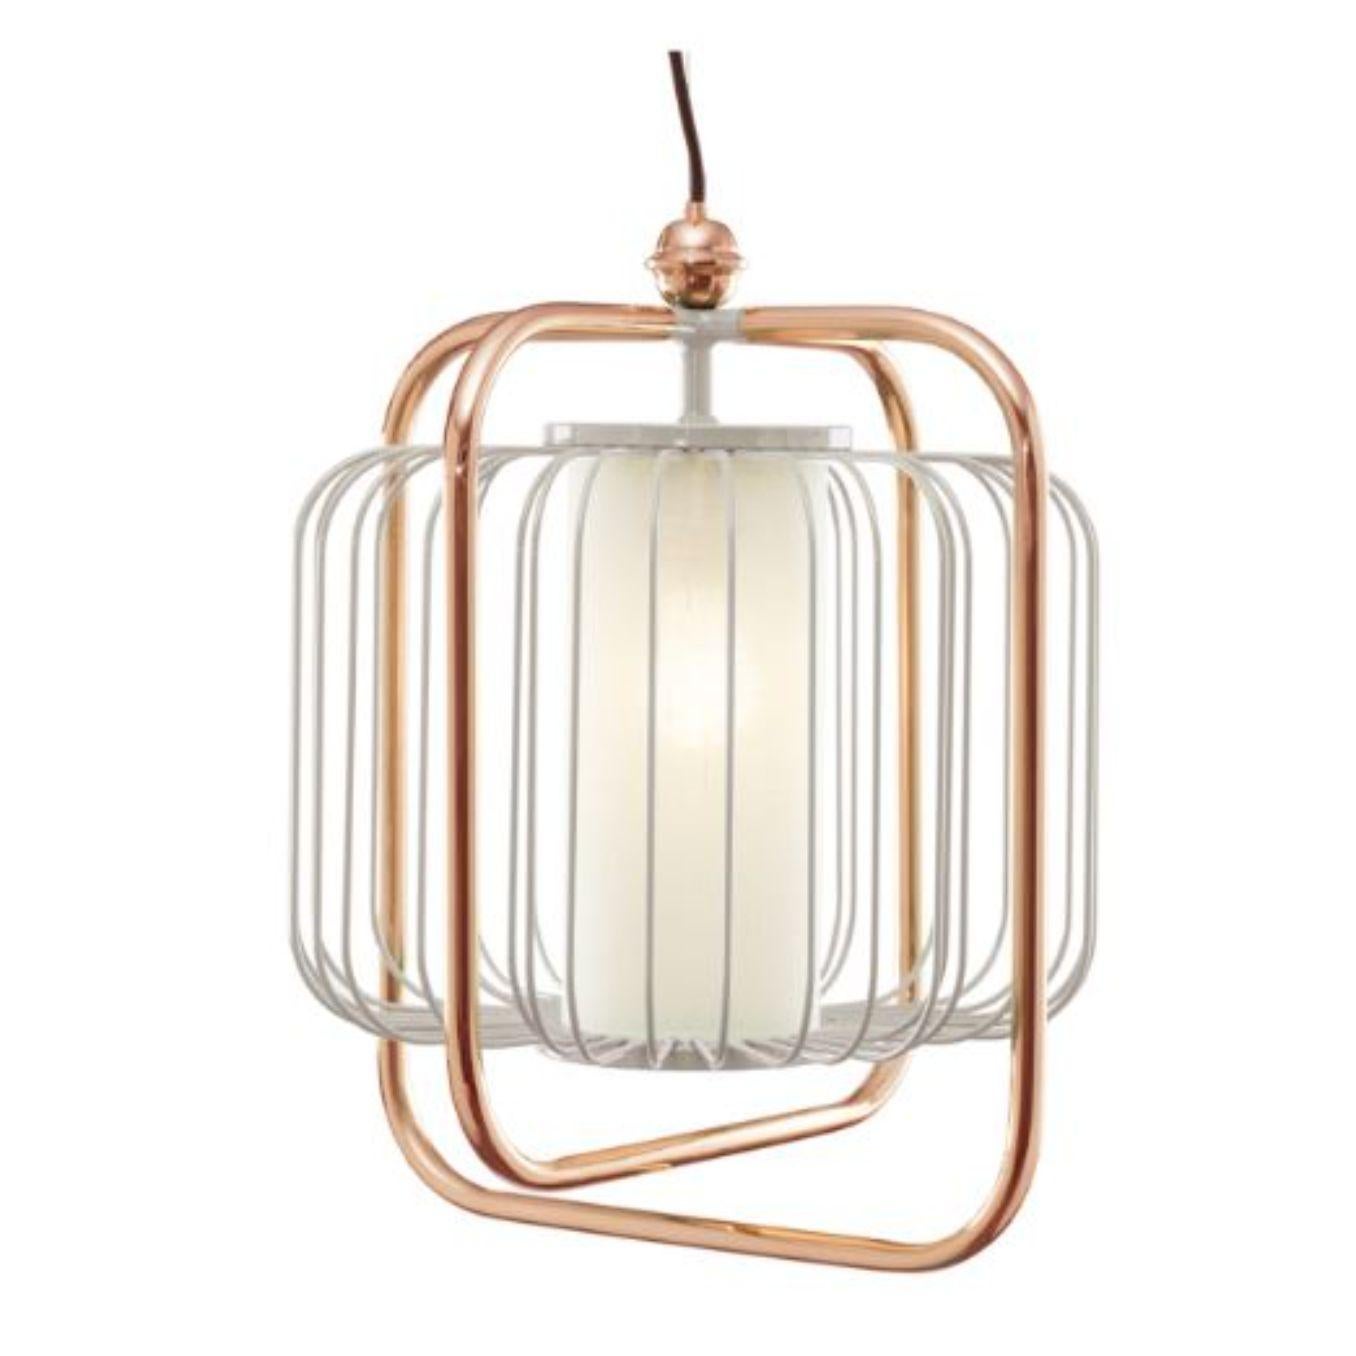 Copper and Taupe Jules III suspension lamp by Dooq
Dimensions: W 38 x D 38 x H 44 cm
Materials: lacquered metal, polished or brushed metal, copper.
abat-jour: cotton
Also available in different colours and